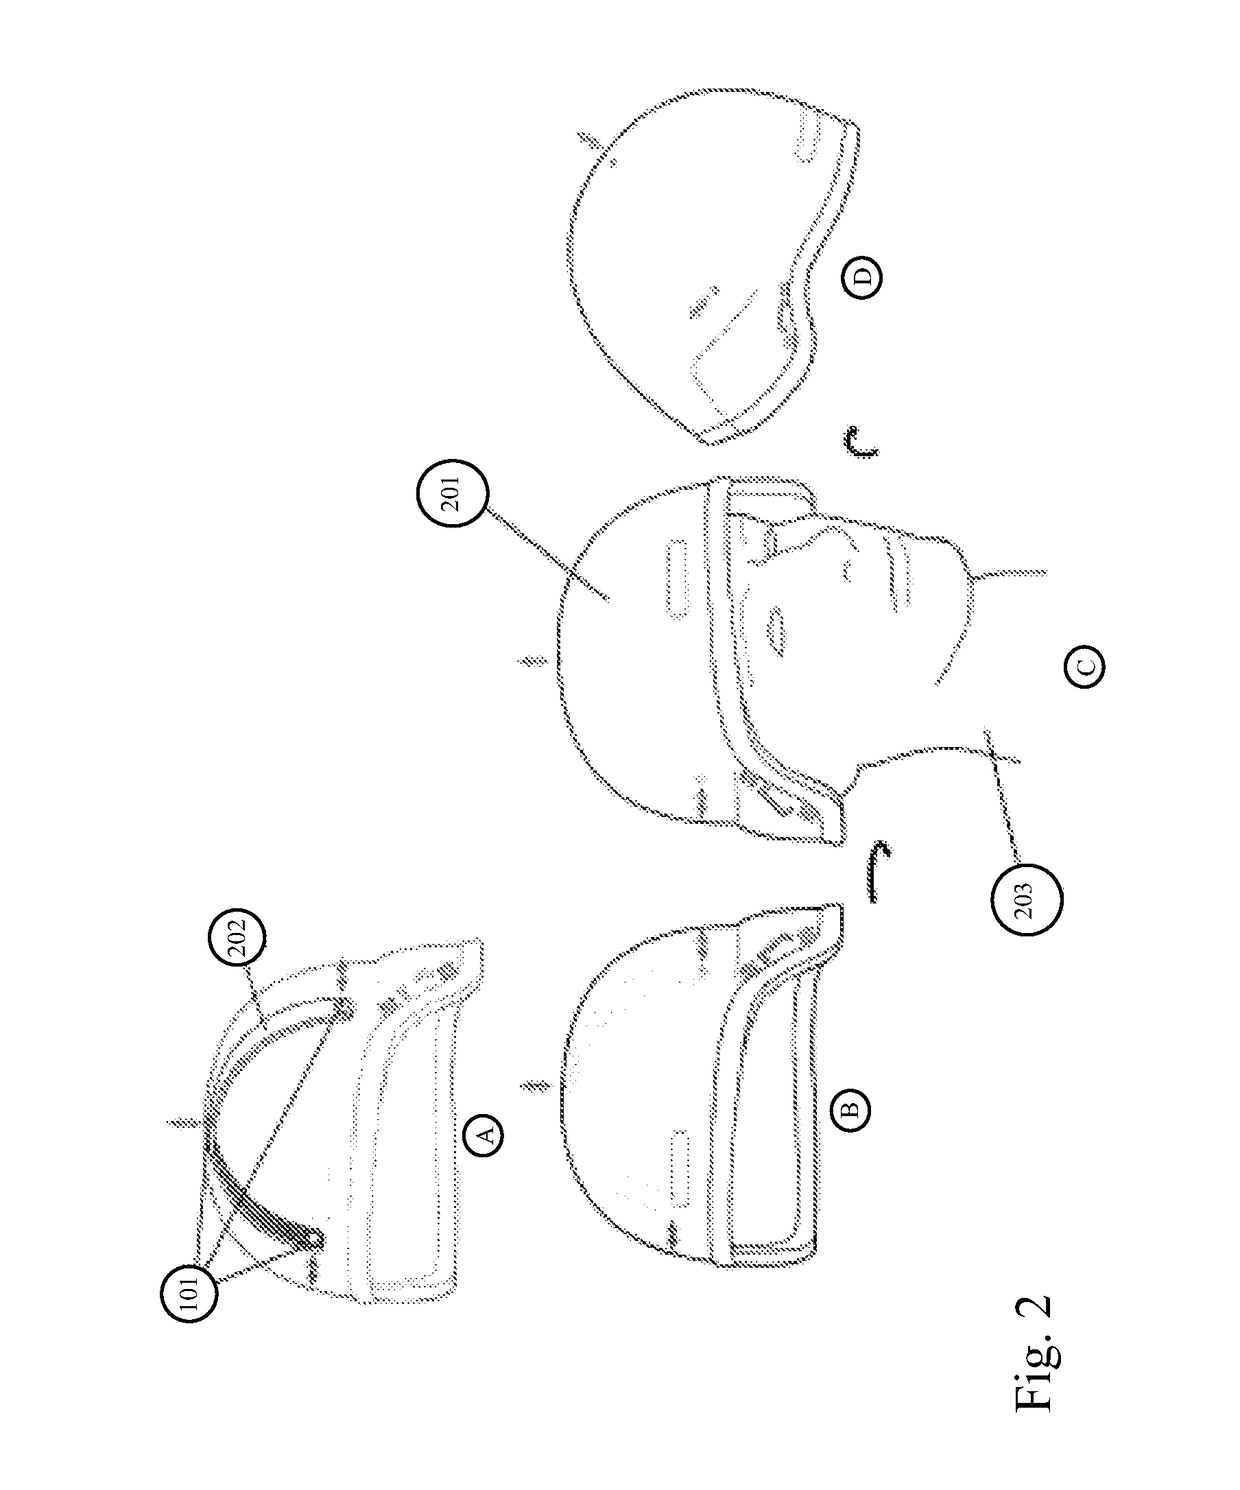 Therapeutic brain cooling system and spinal cord cooling system